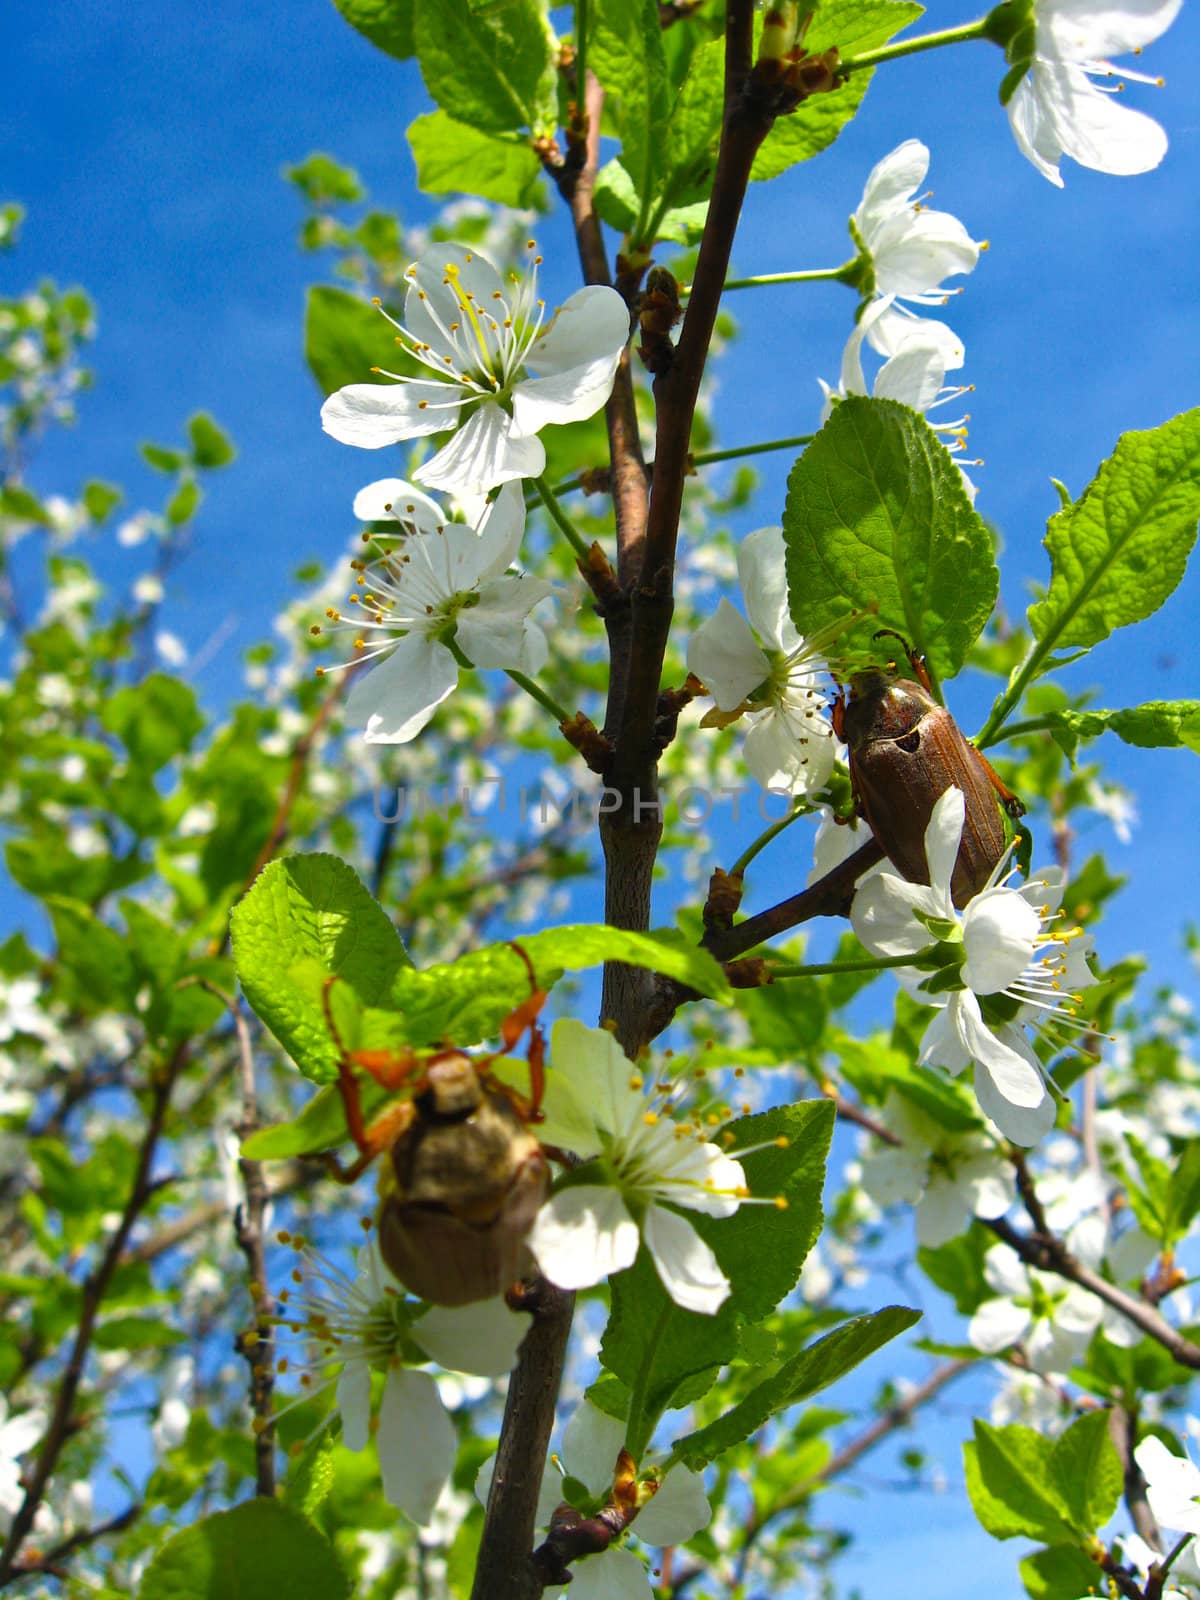 Chafers climbing on blossoming plum by alexmak